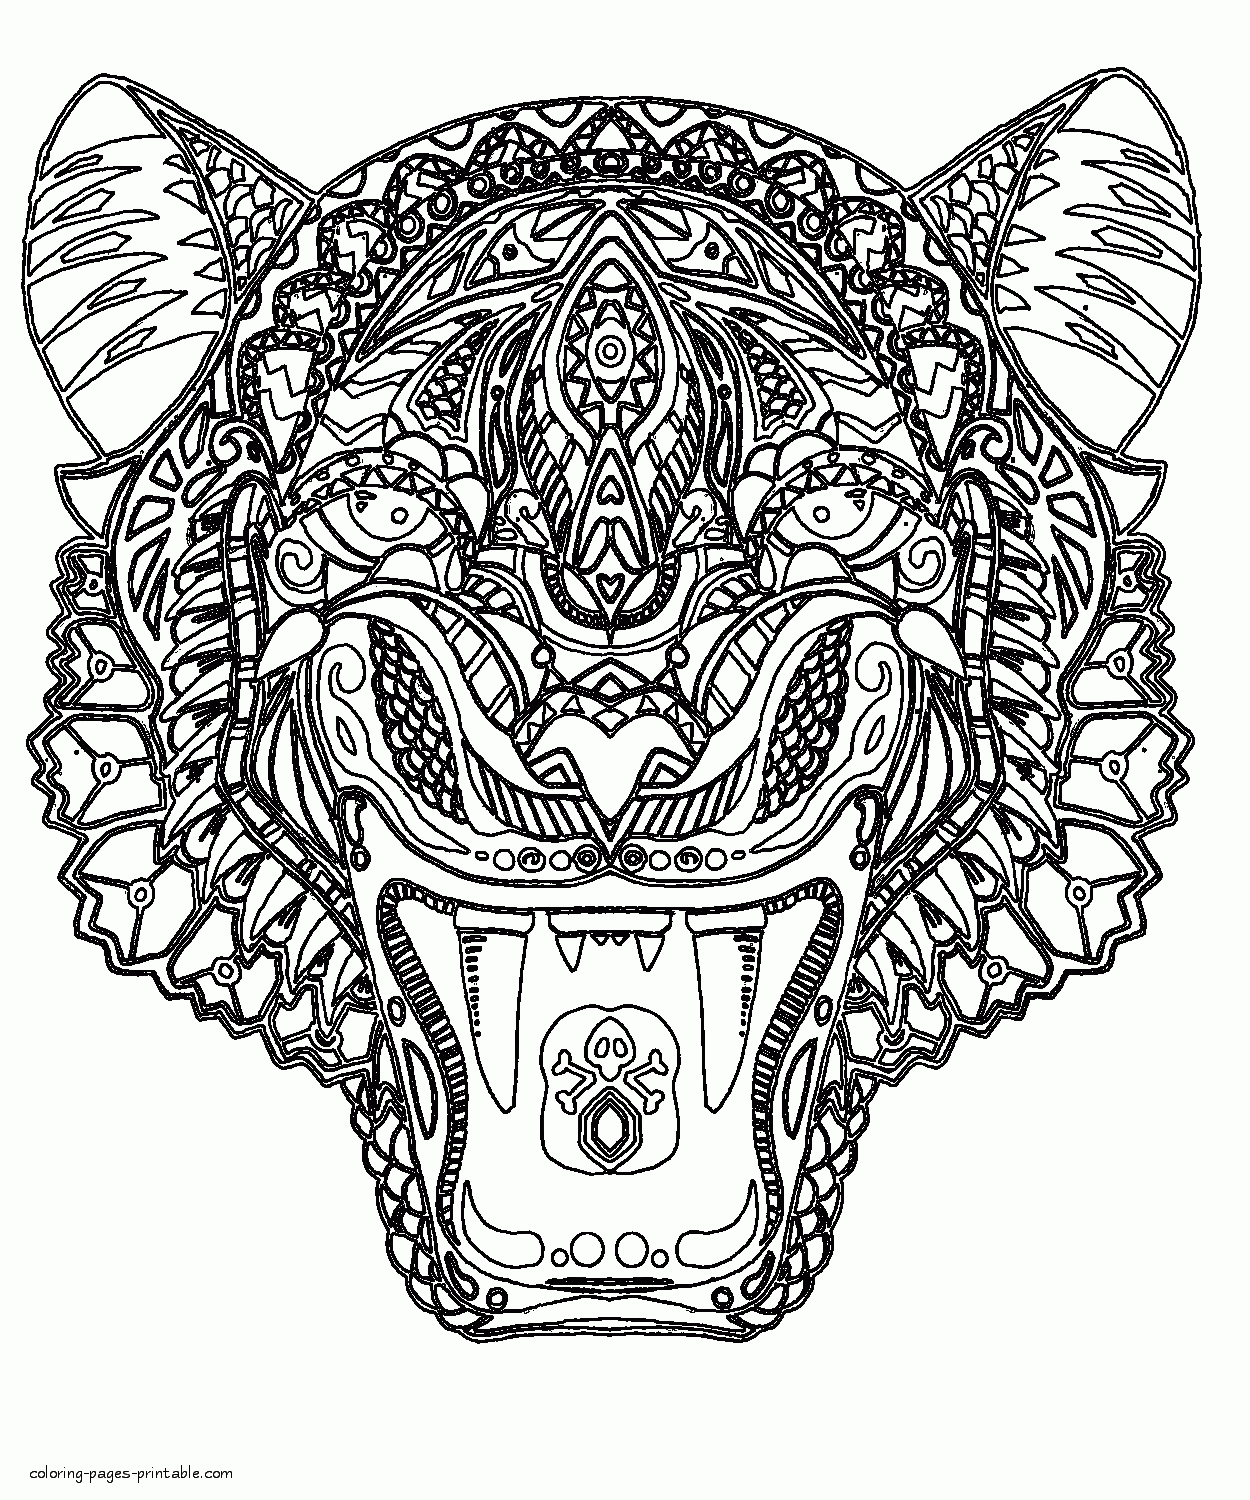 Tiger Coloring Page For Adults    COLORING PAGES PRINTABLE.COM